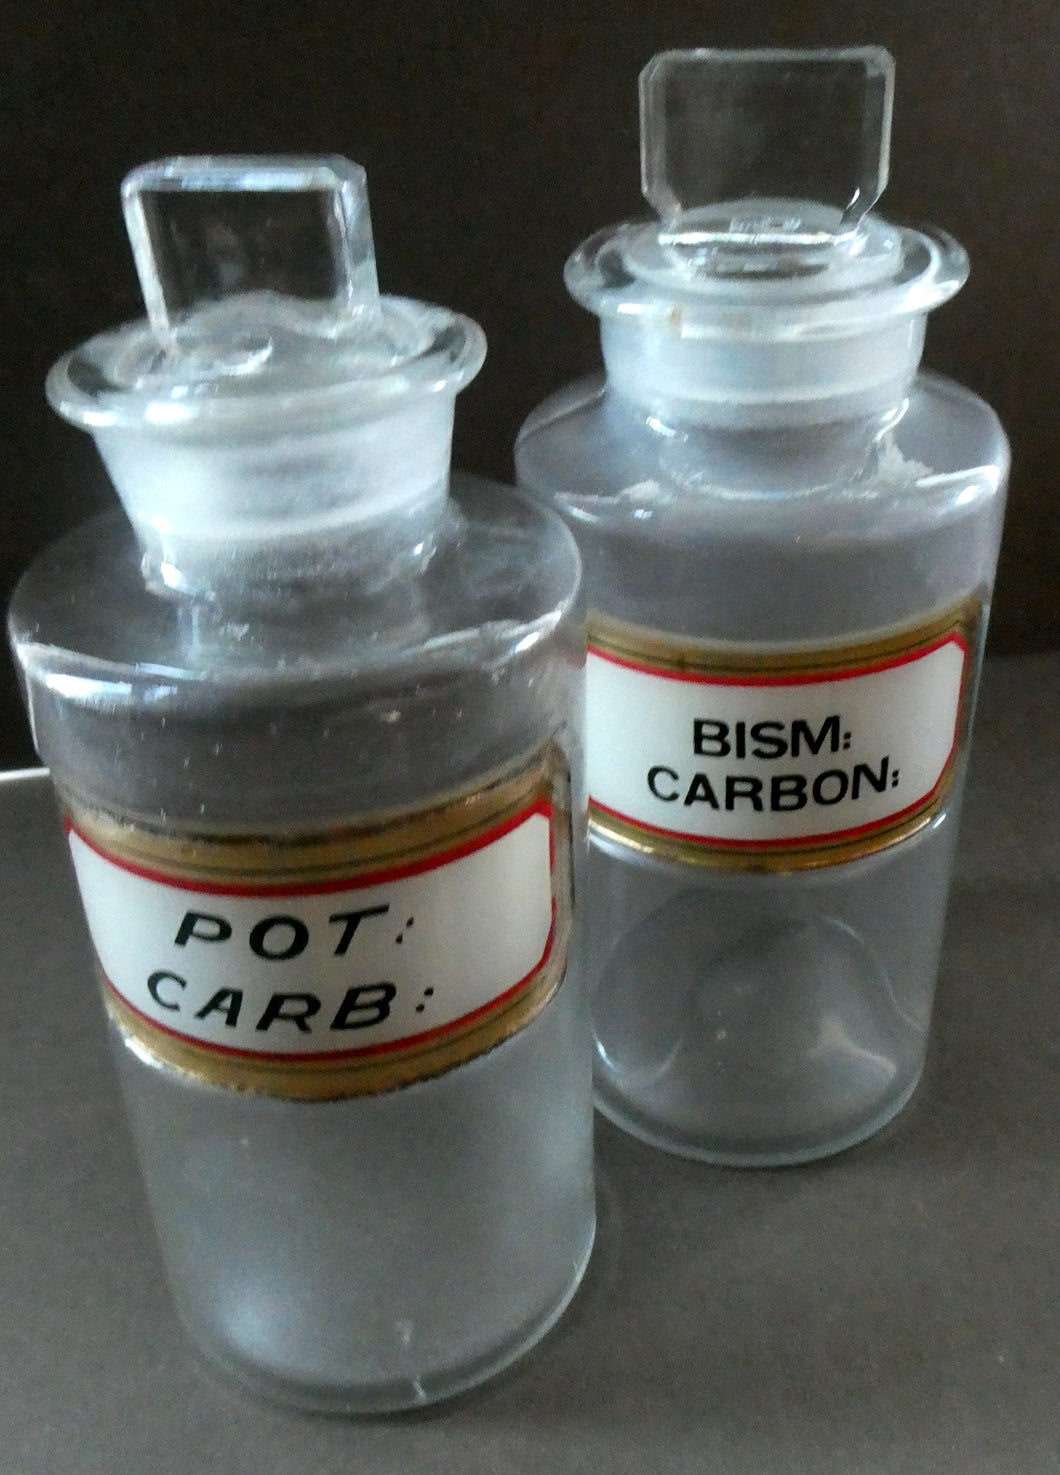 PAIR OF Larger Antique Clear Glass Chemist Bottles with Original Foil Labels and Lozenge Stoppers